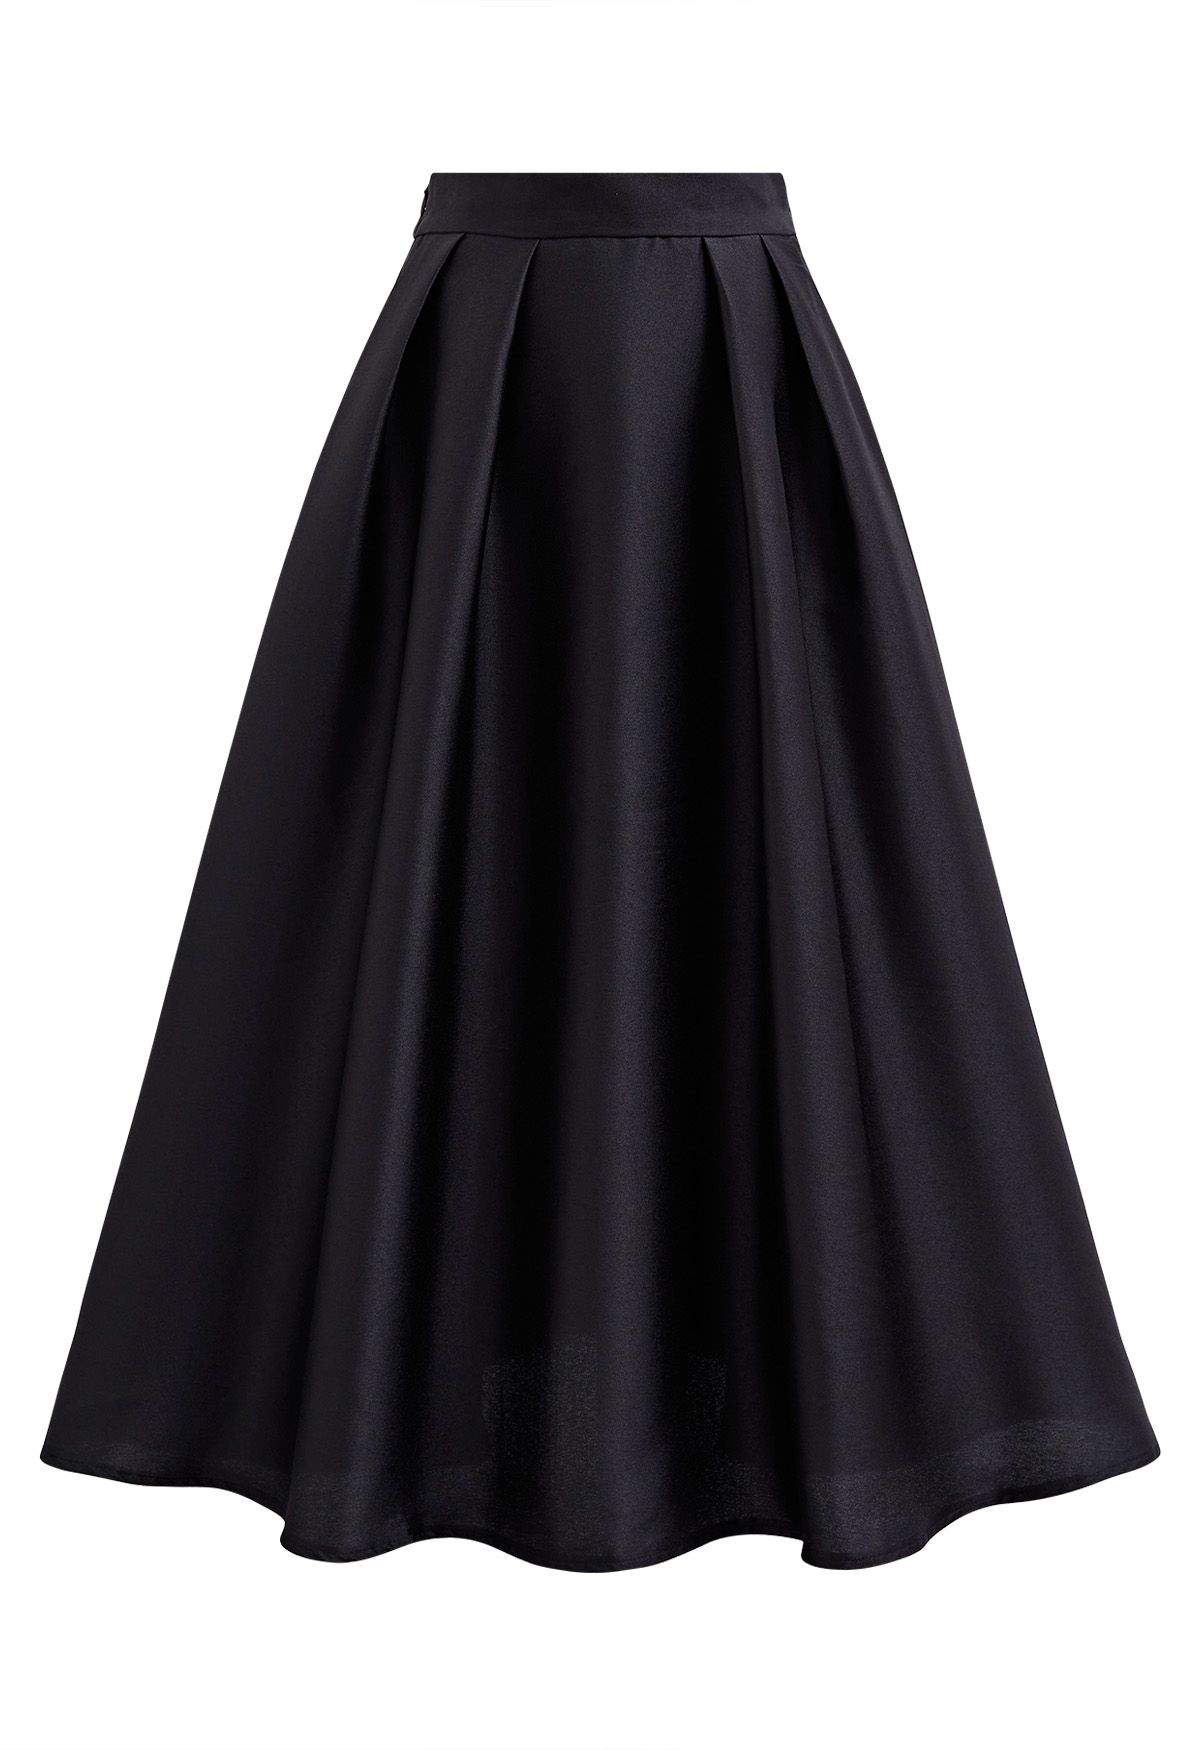 Sleek Side Pockets Pleated A-Line Midi Skirt in Black - Retro, Indie and  Unique Fashion